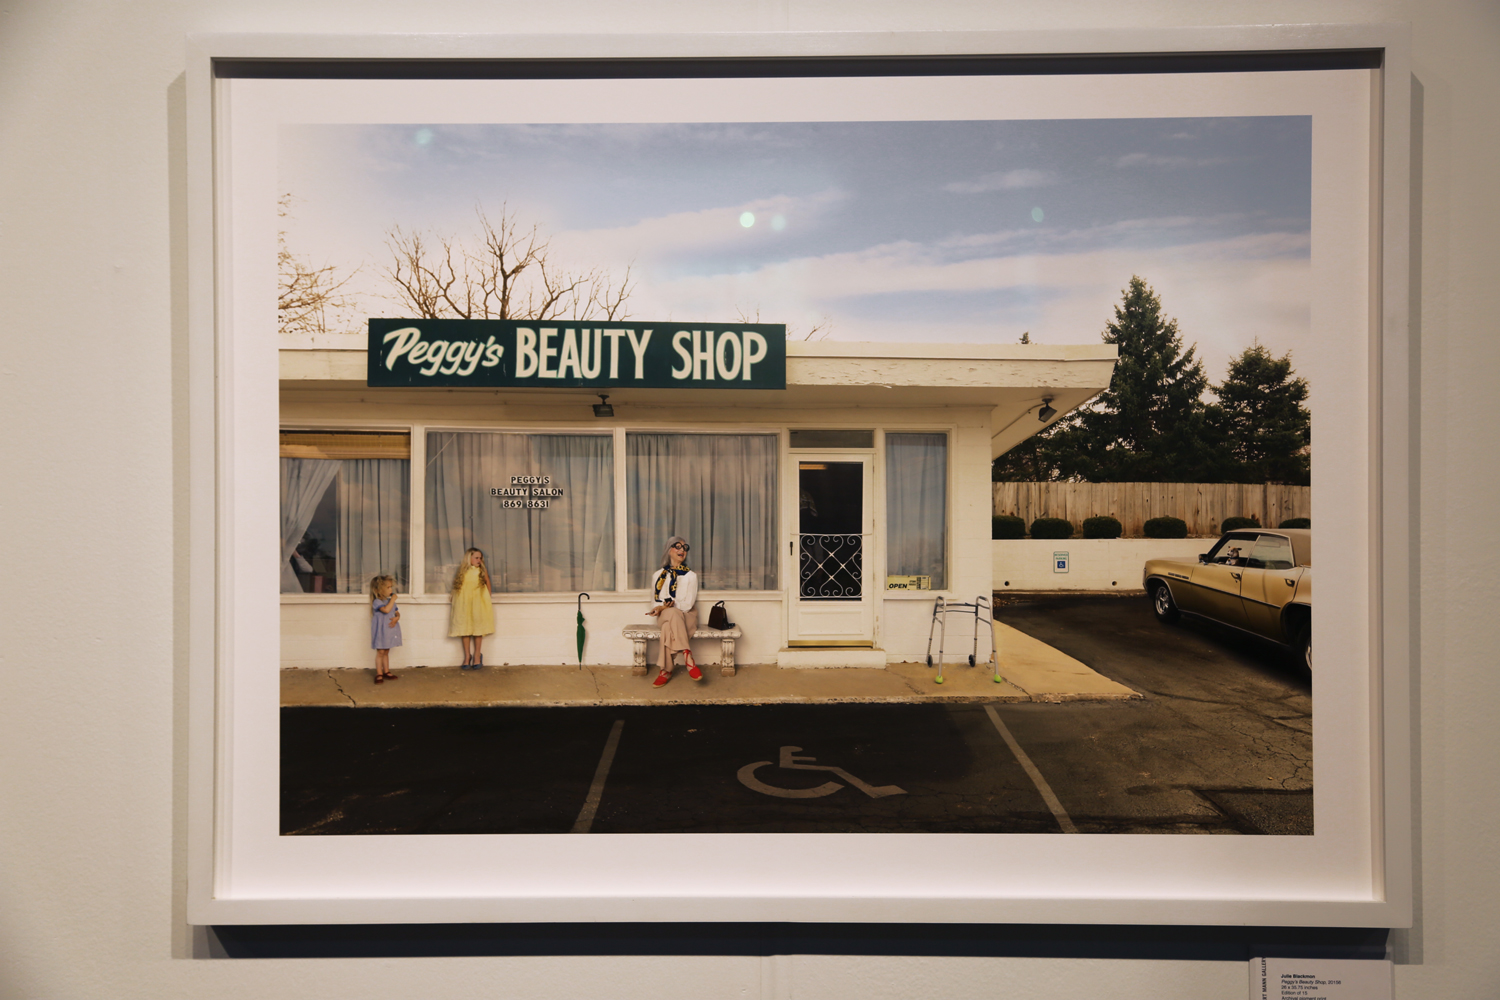 Peggy's Beauty Shop, 2015, Julie Blackmon, Robert Mann Gallery, New York. Image by the author.